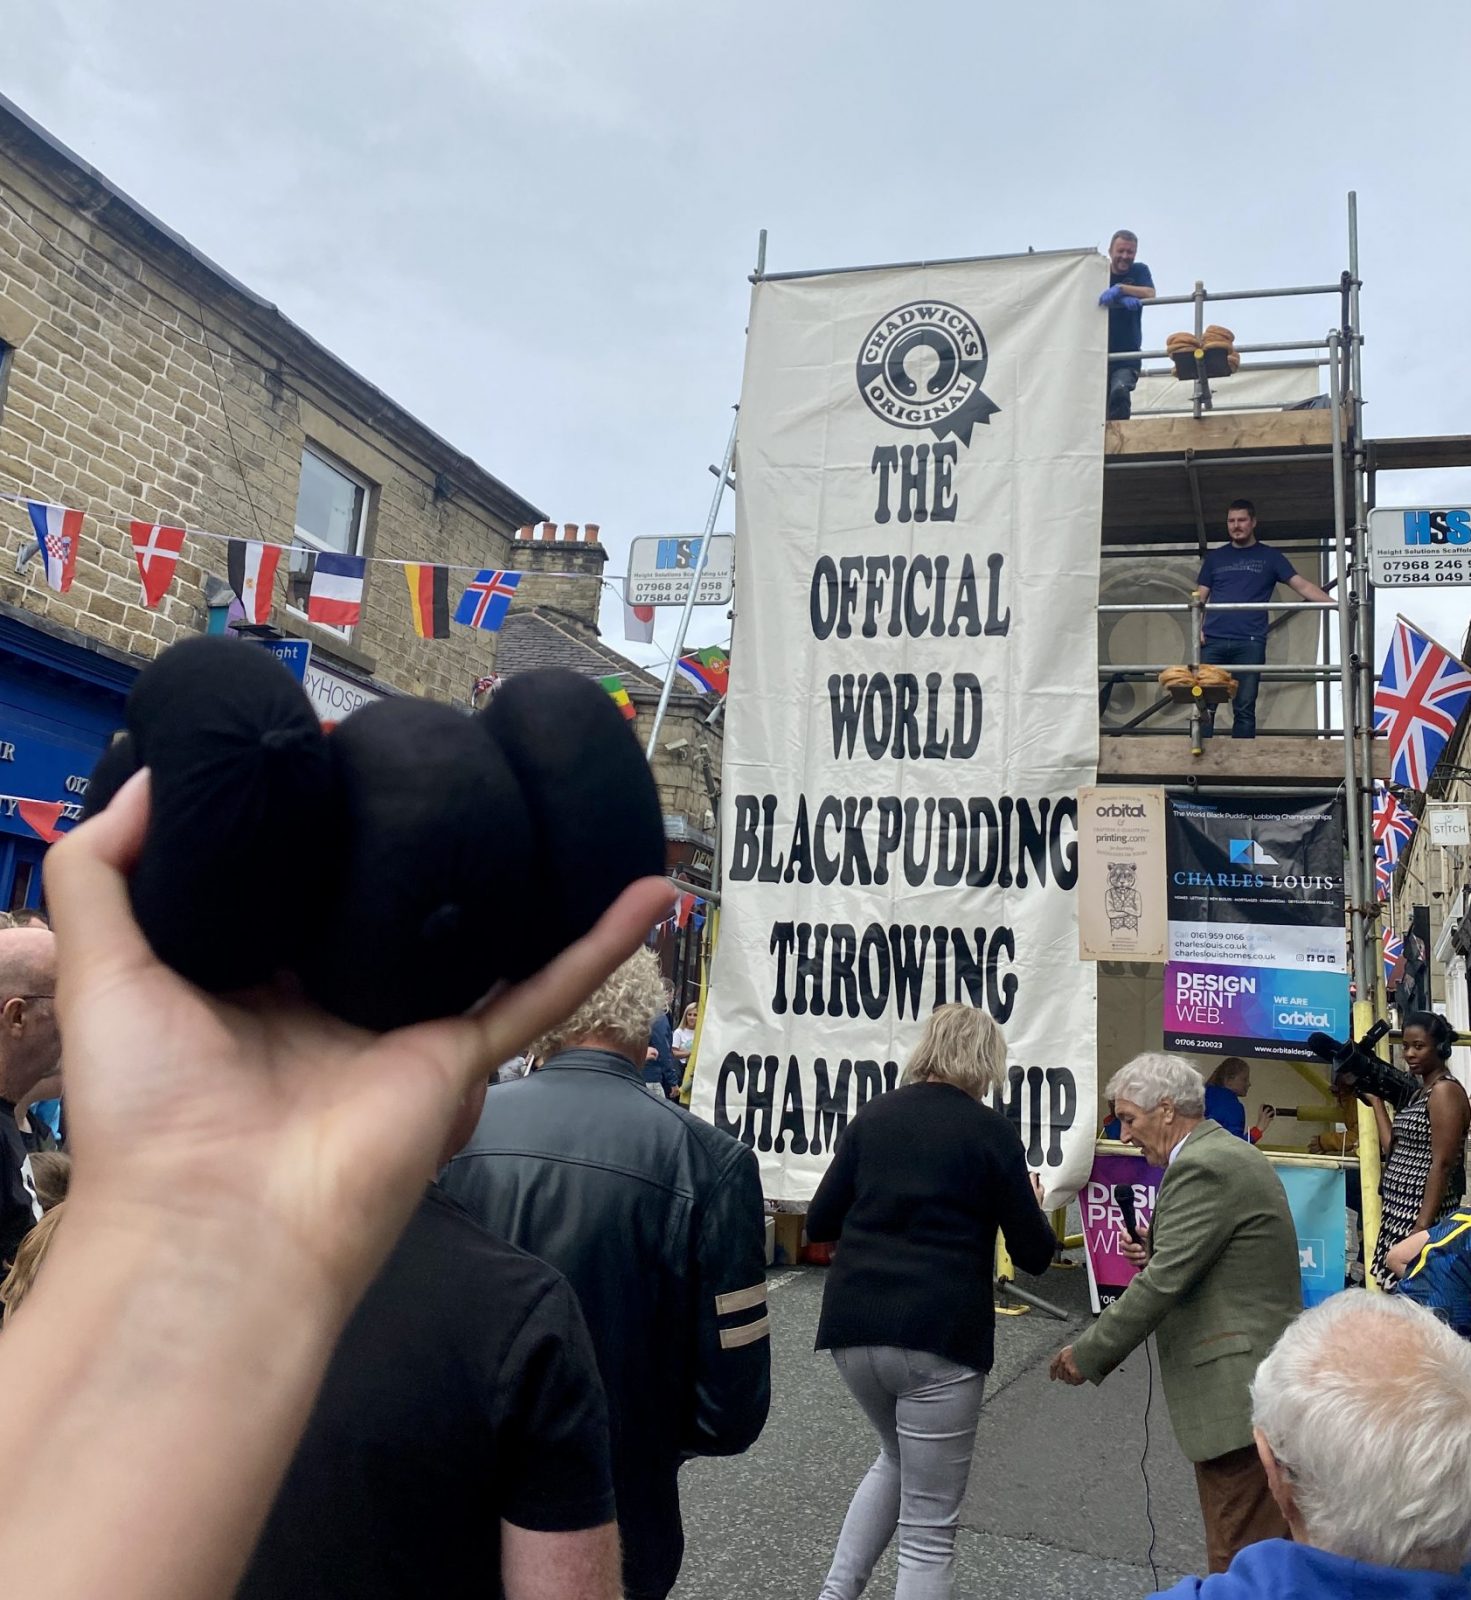 Man becomes two-time World Black Pudding Throwing champion in Ramsbottom, The Manc